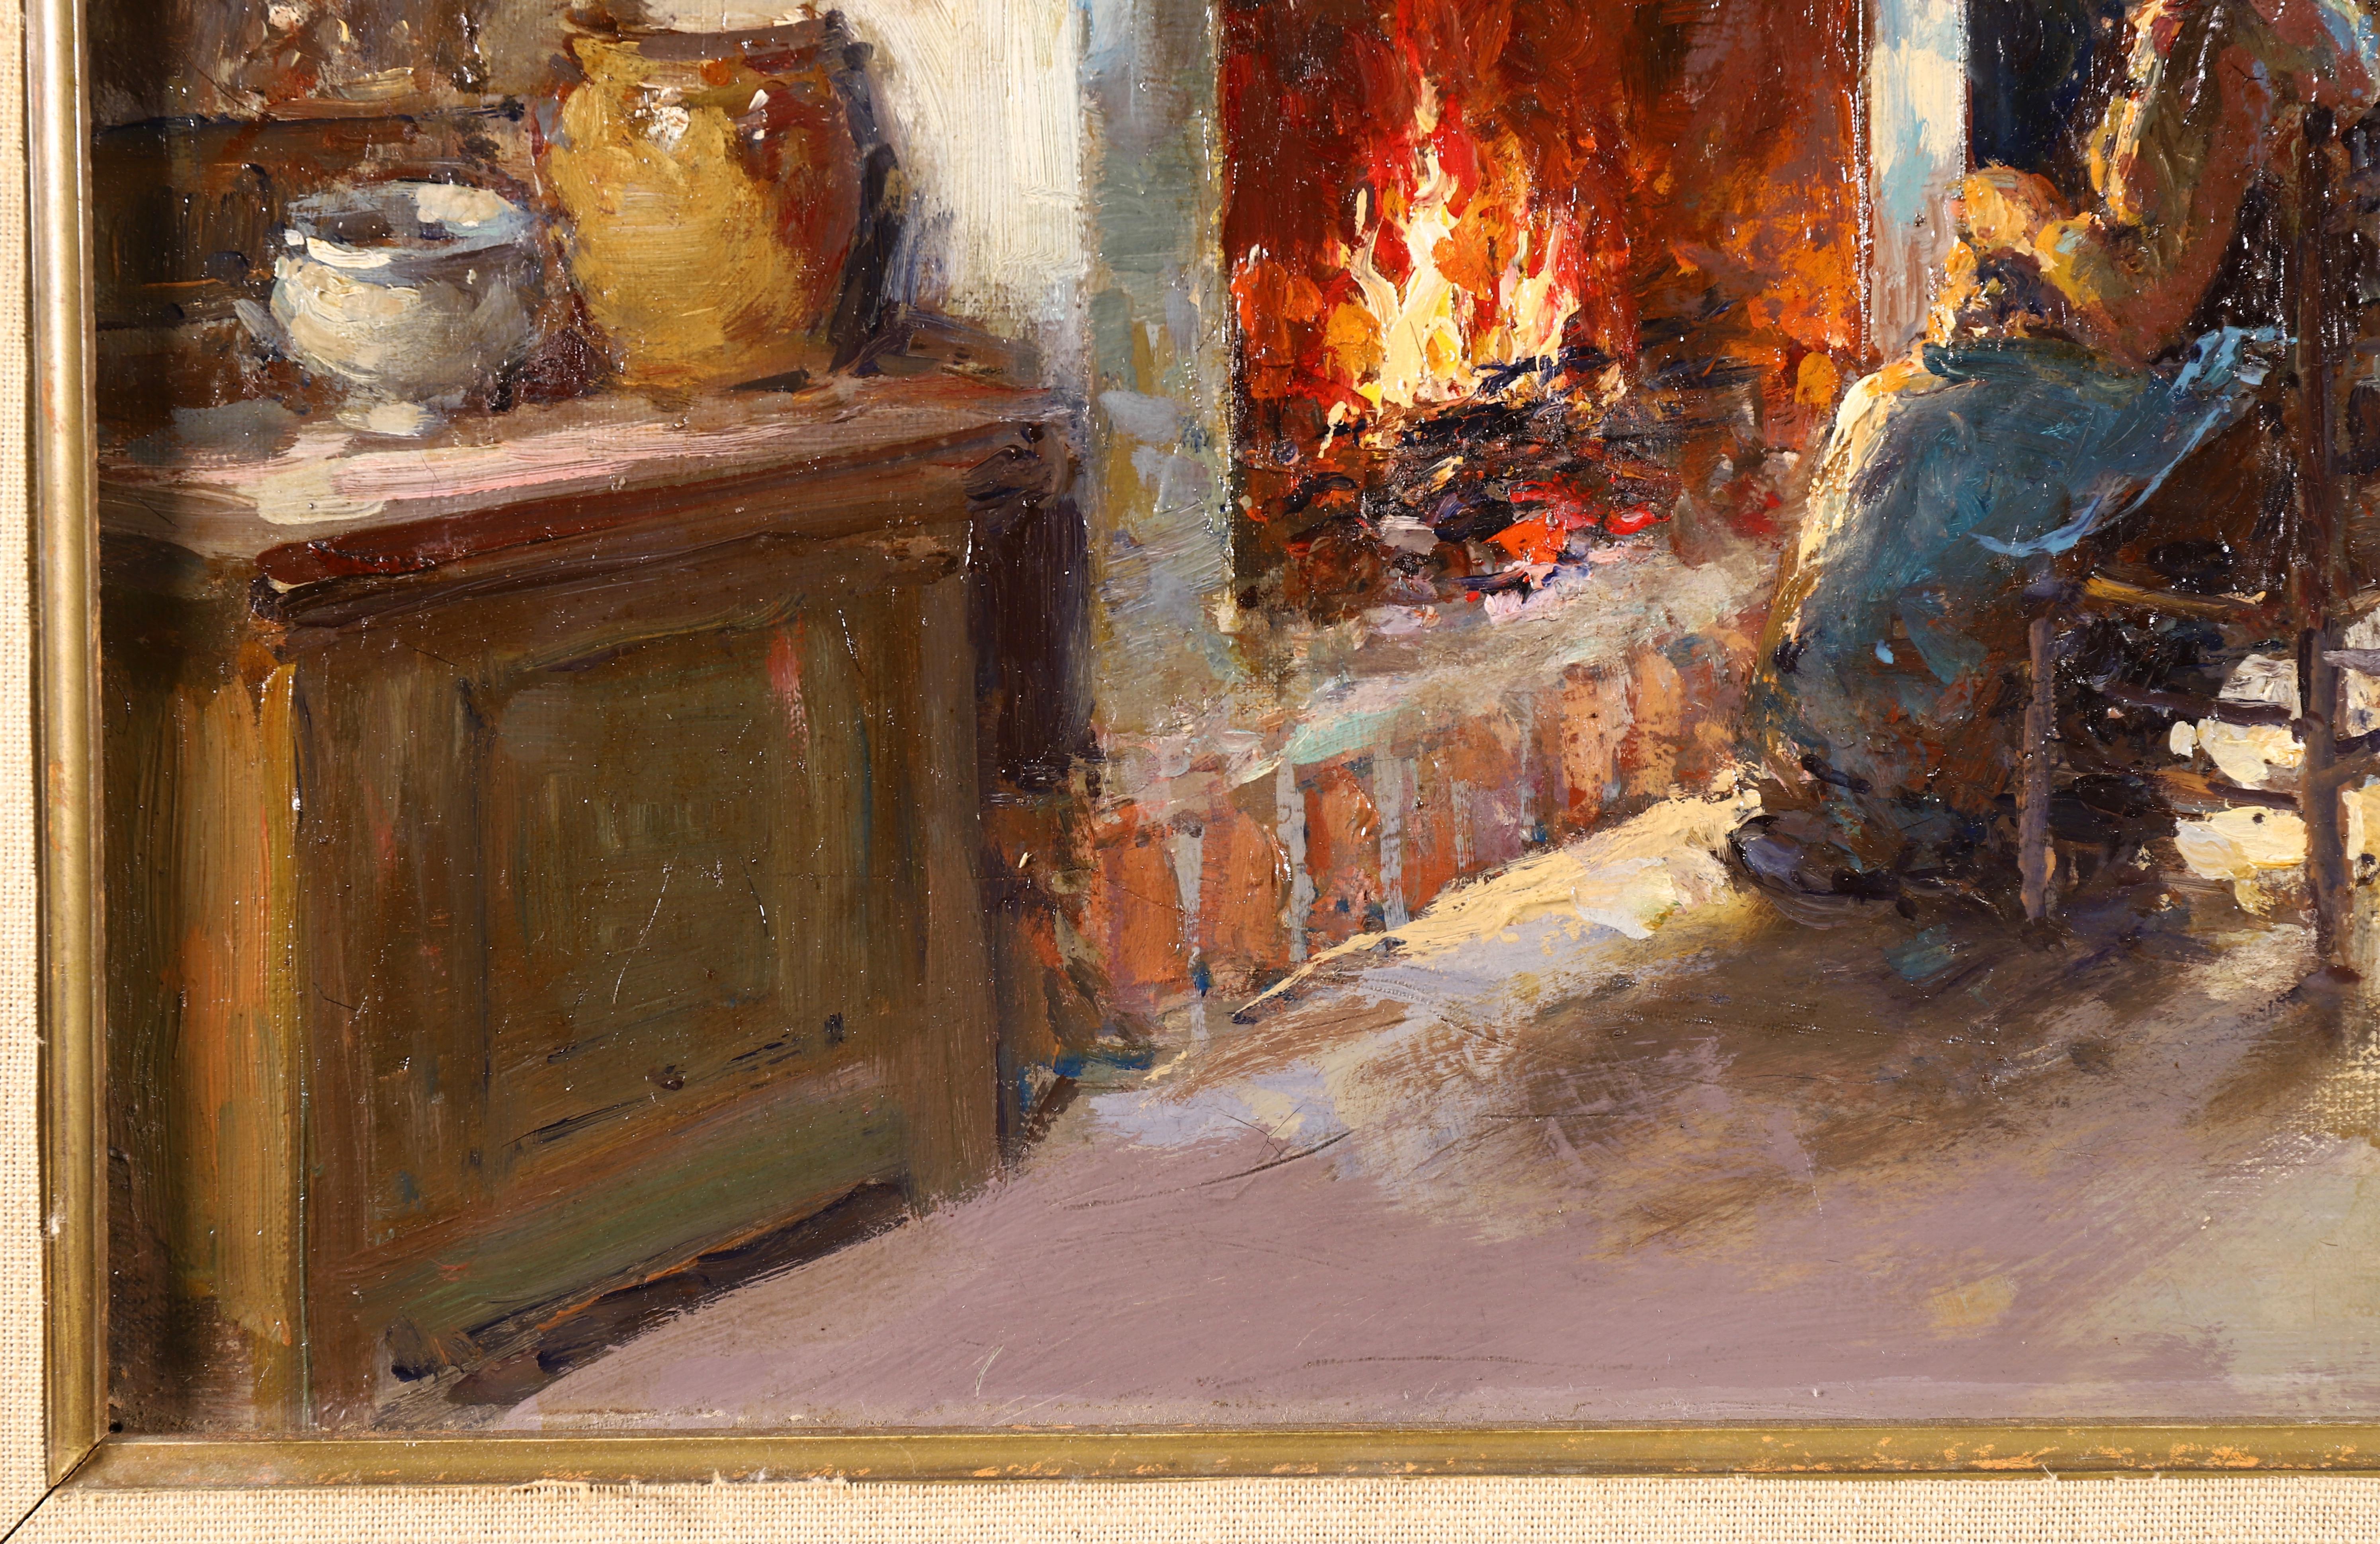 A beautifully painted oil on canvas by French impressionist painter Edouard Leon Cortes depicting a Breton interior with a woman seated in front of an open fire sewing. Signed lower right. 

The work has been authenticated by Mme. Nicole Verdier and